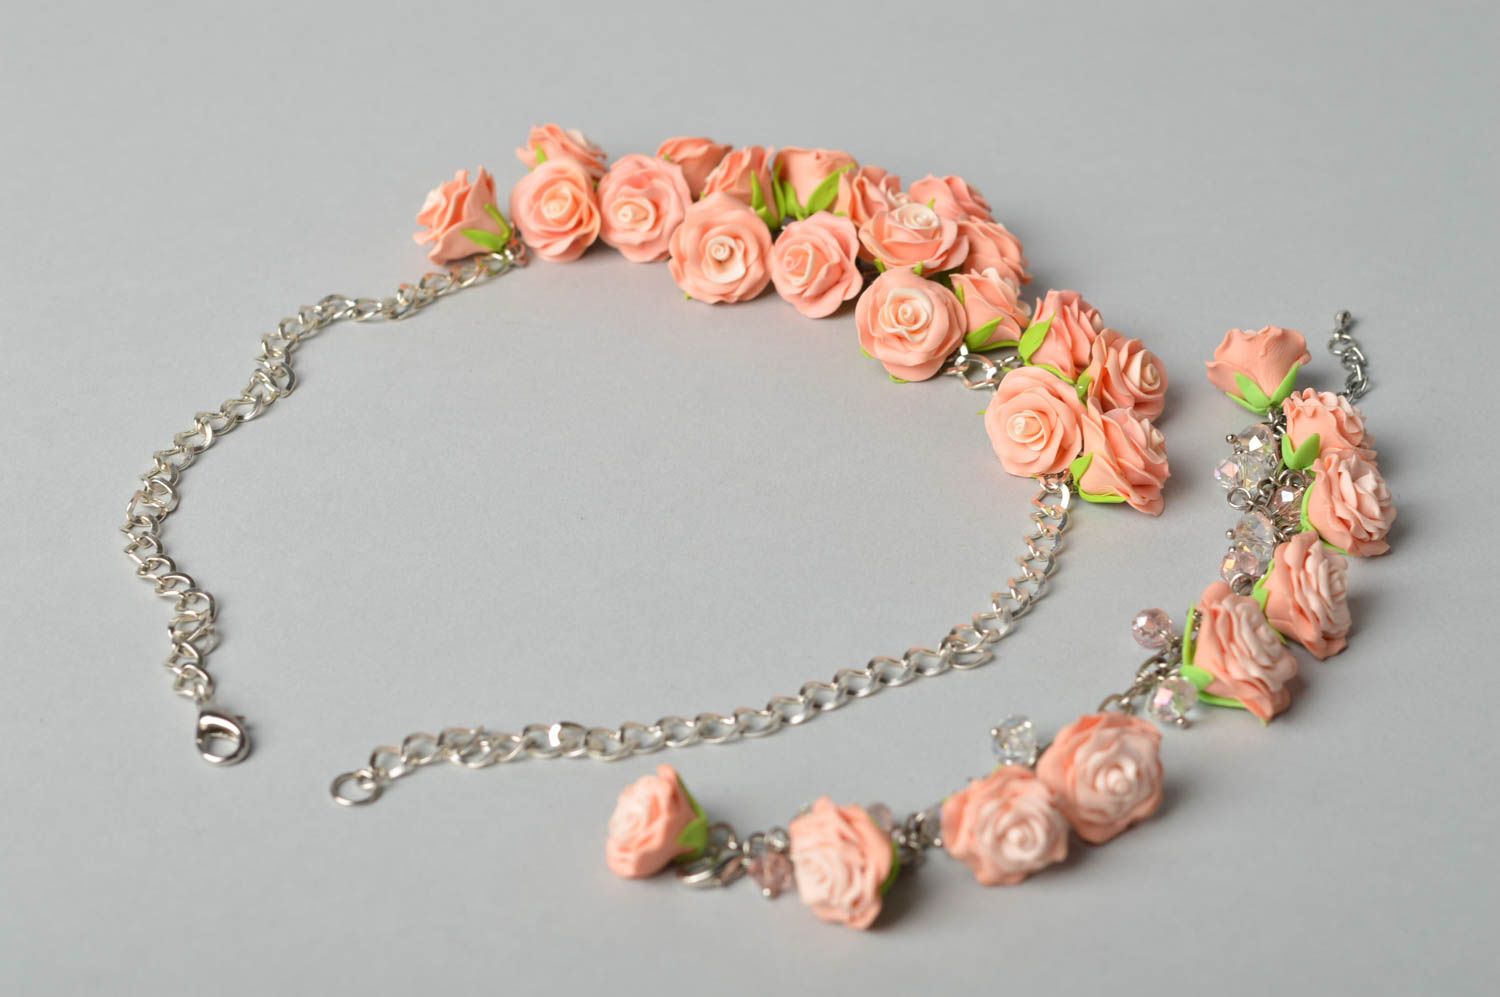 Chain acrylic pink roses necklace with a chain charm bracelet for mom photo 3